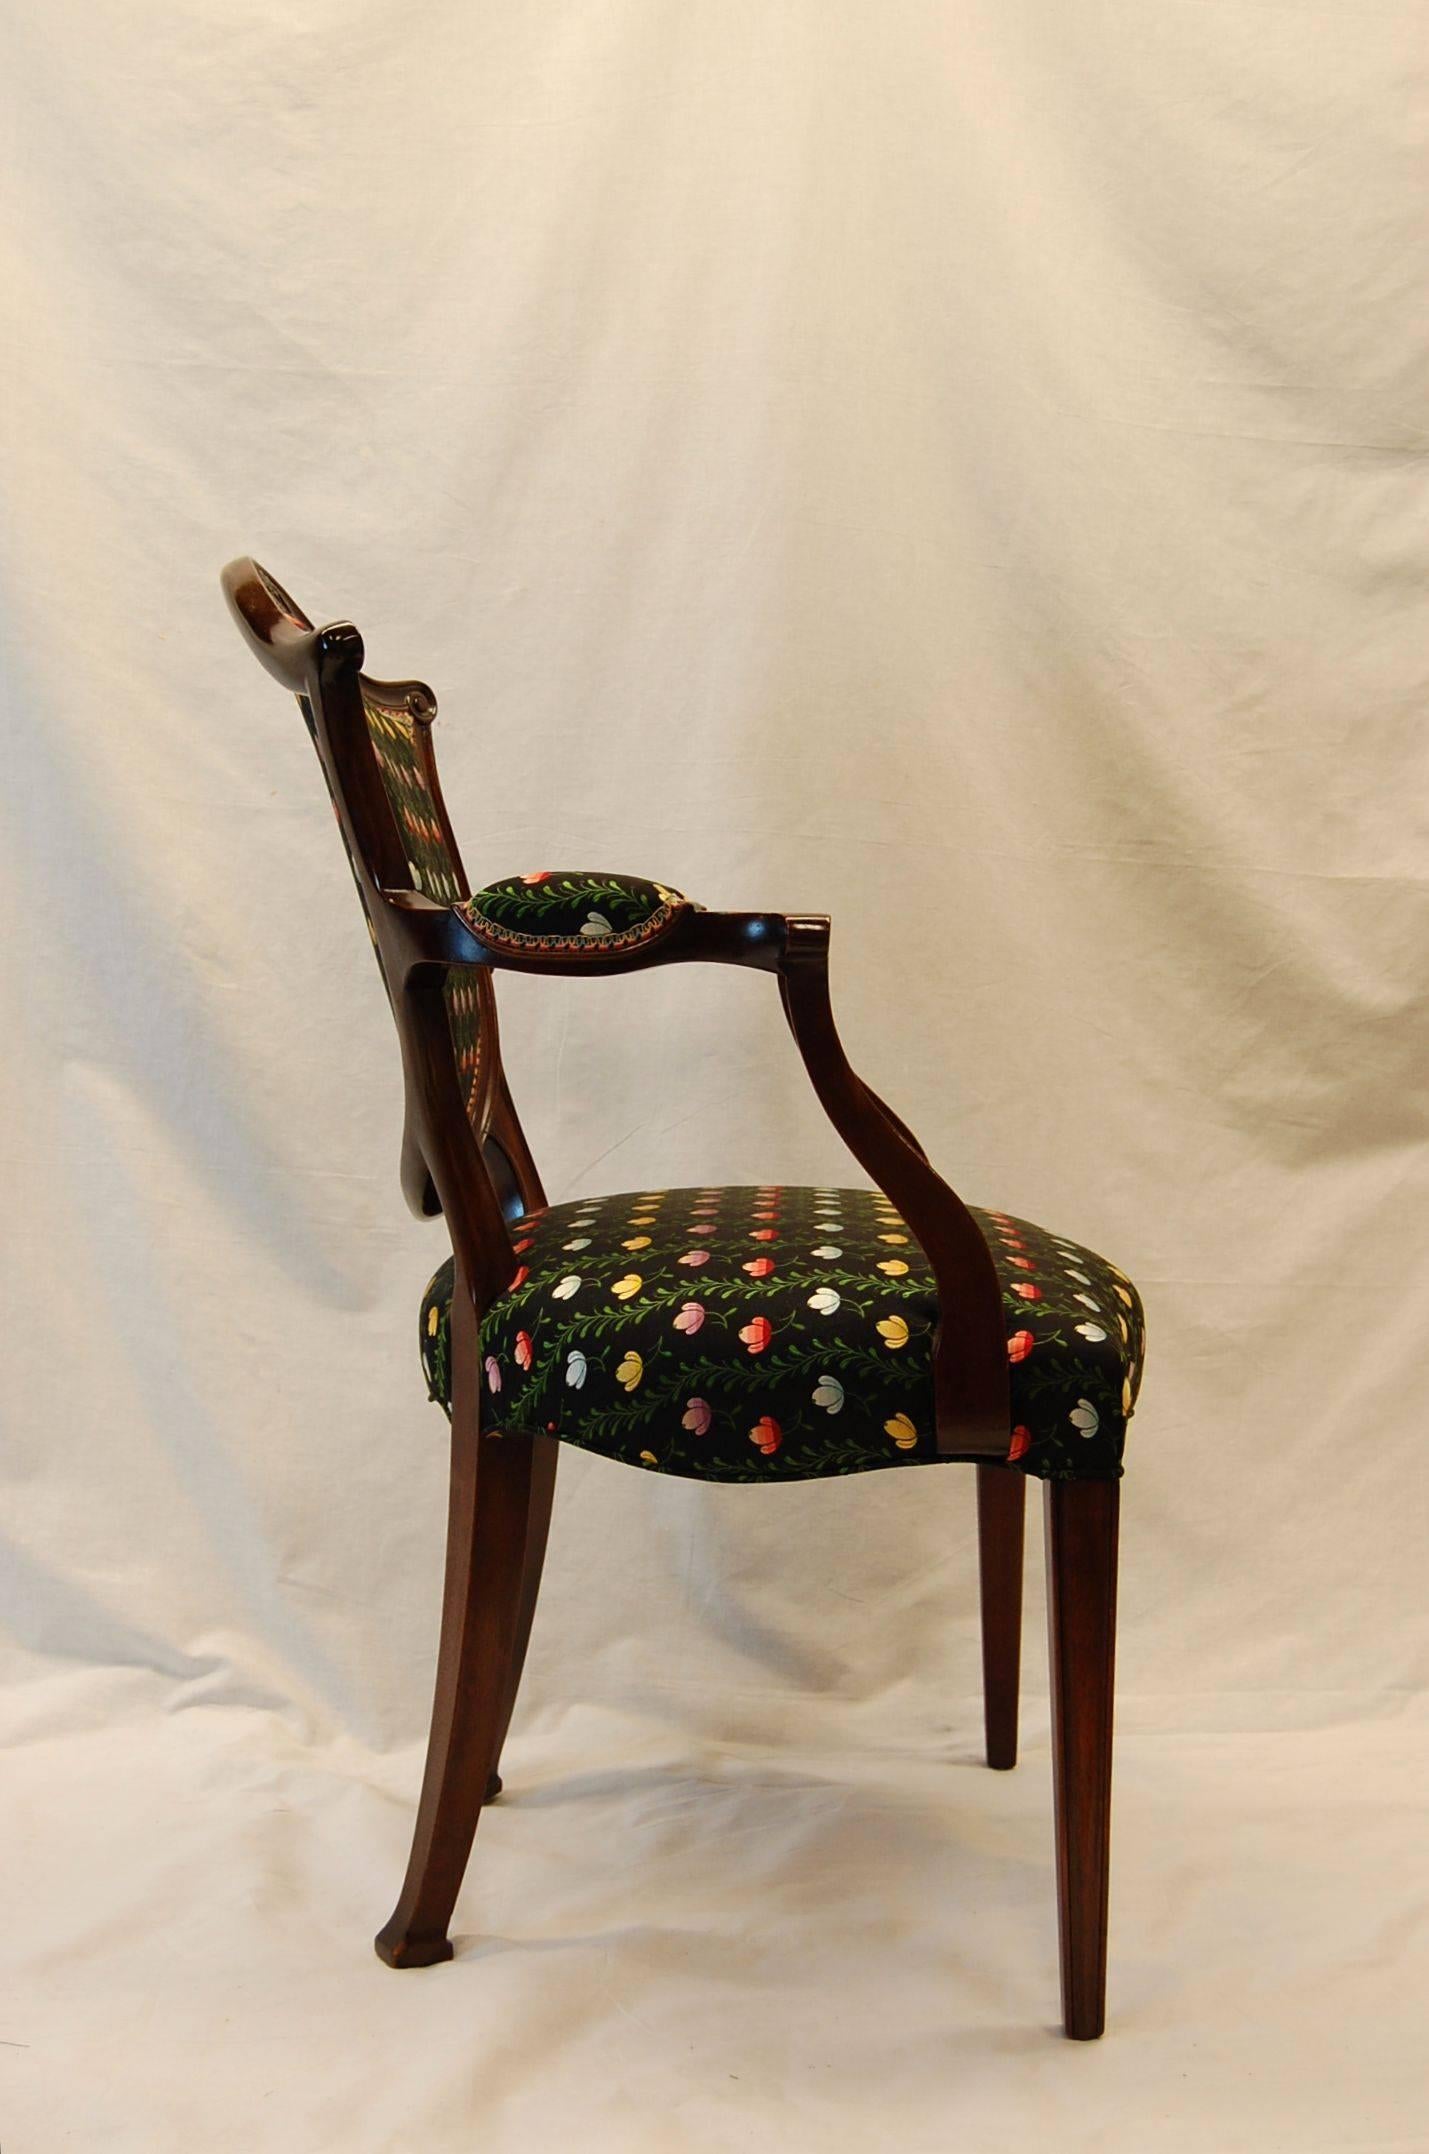 Hand-Crafted Hepplewhite Style Mahogany Open-Arm Chair Covered in Silk Brocade For Sale